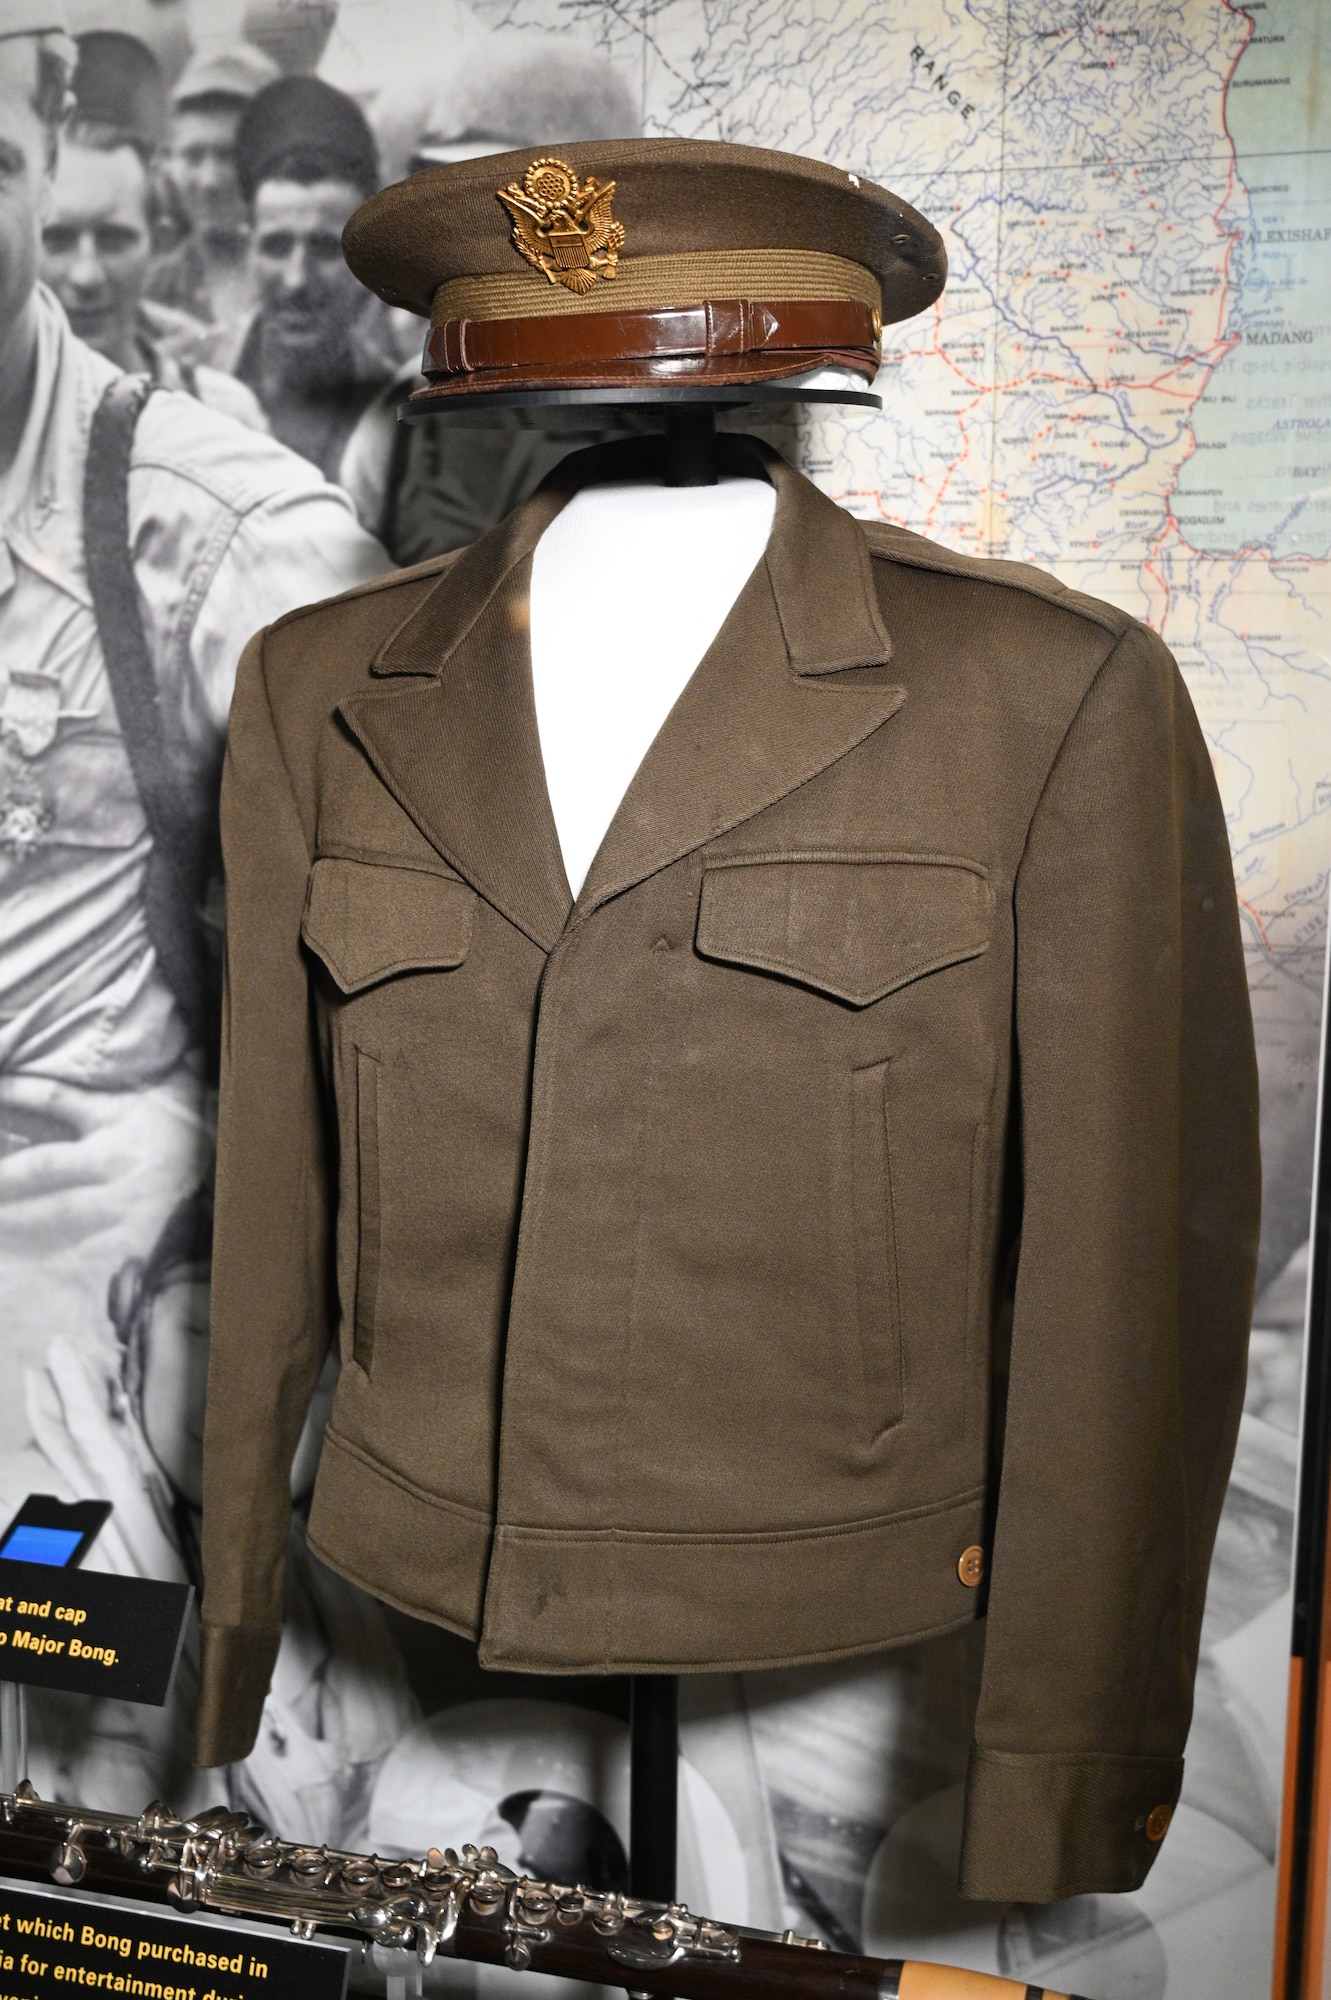 Officer's cap and uniform belonging to Maj. Richard I. Bong on display in the WWII Gallery at the National Museum of the U.S. Air Force.